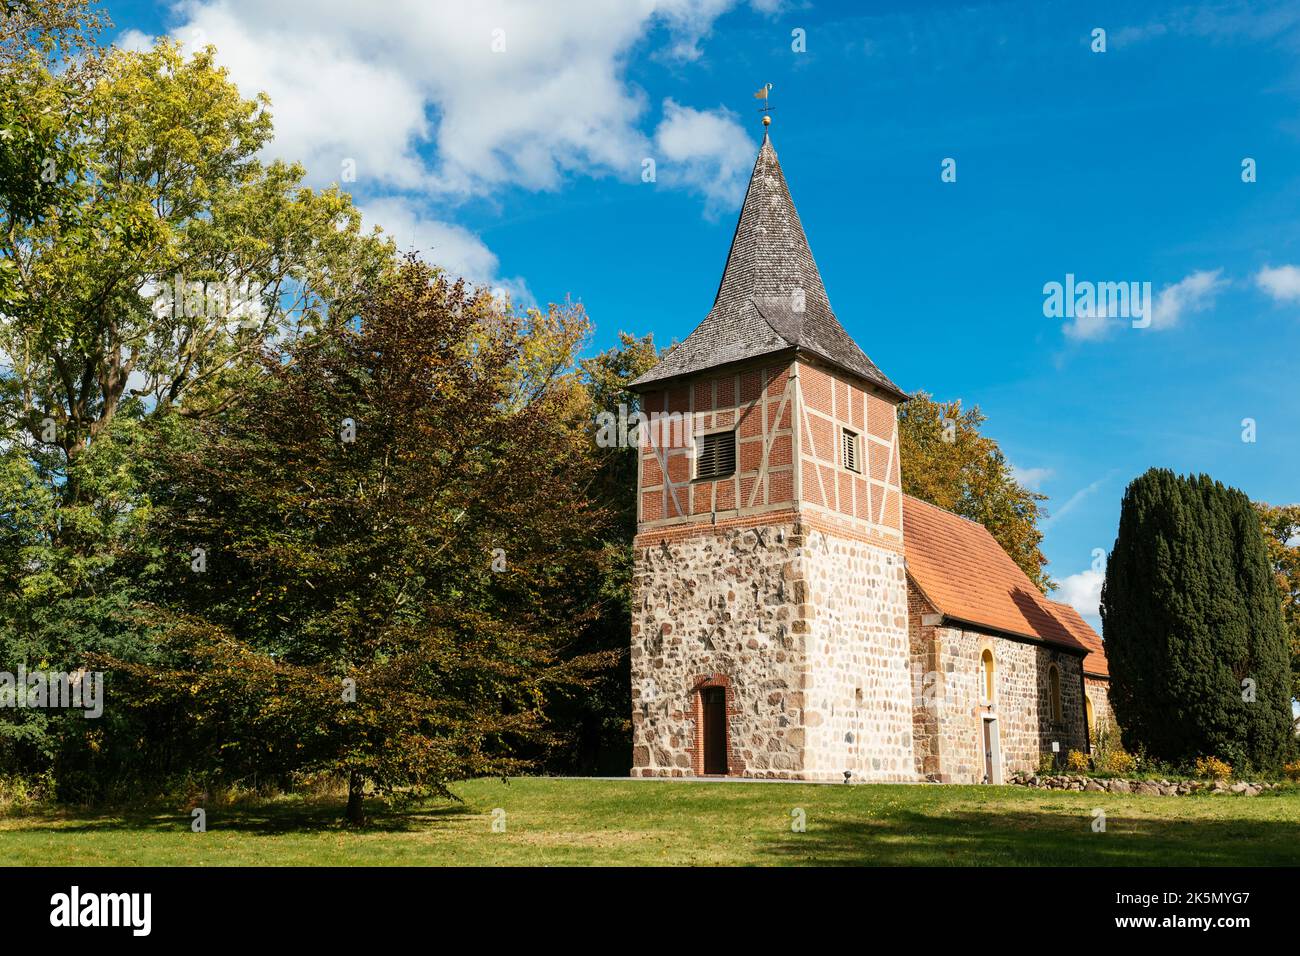 Monumental John the Baptist church in Bexhövede, Loxstedt, Cuxhaven, Germany Stock Photo